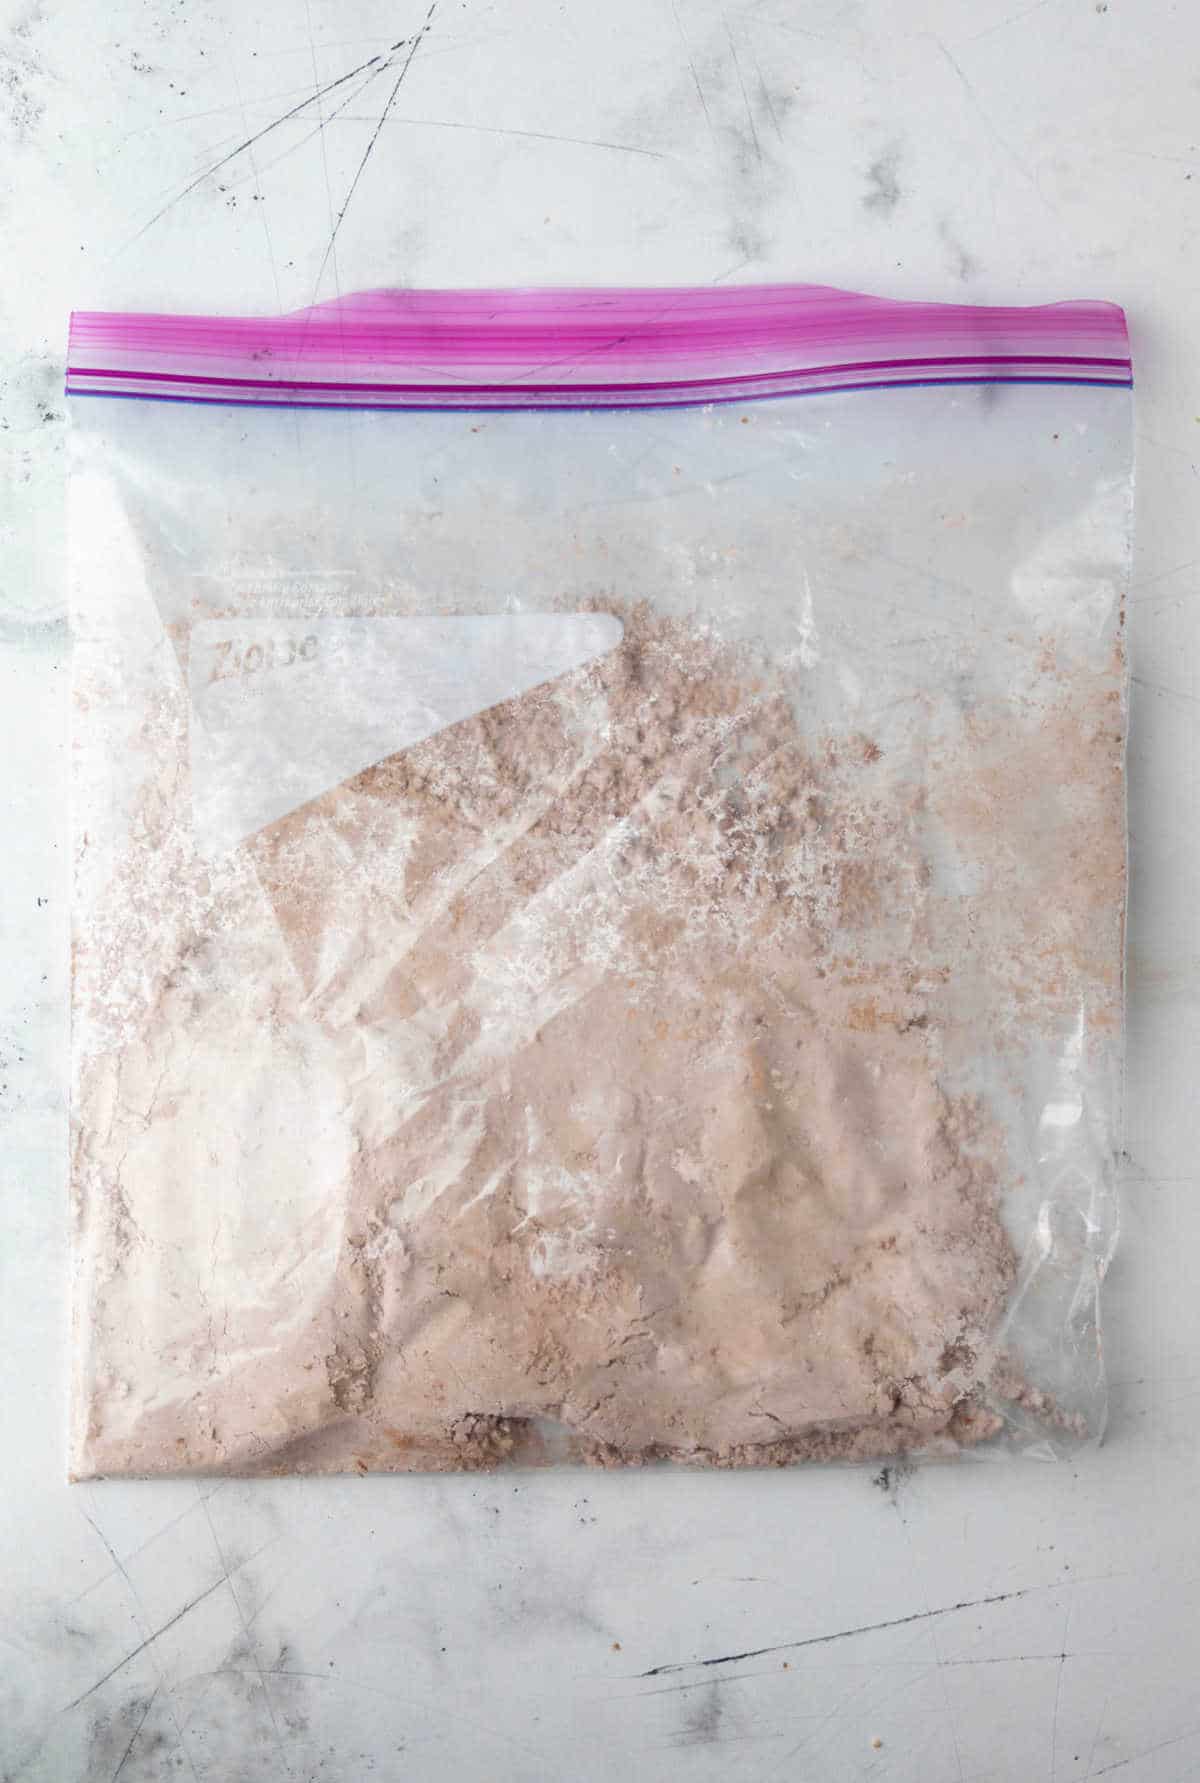 Cocoa powder and powdered sugar in a resealable baggie. 